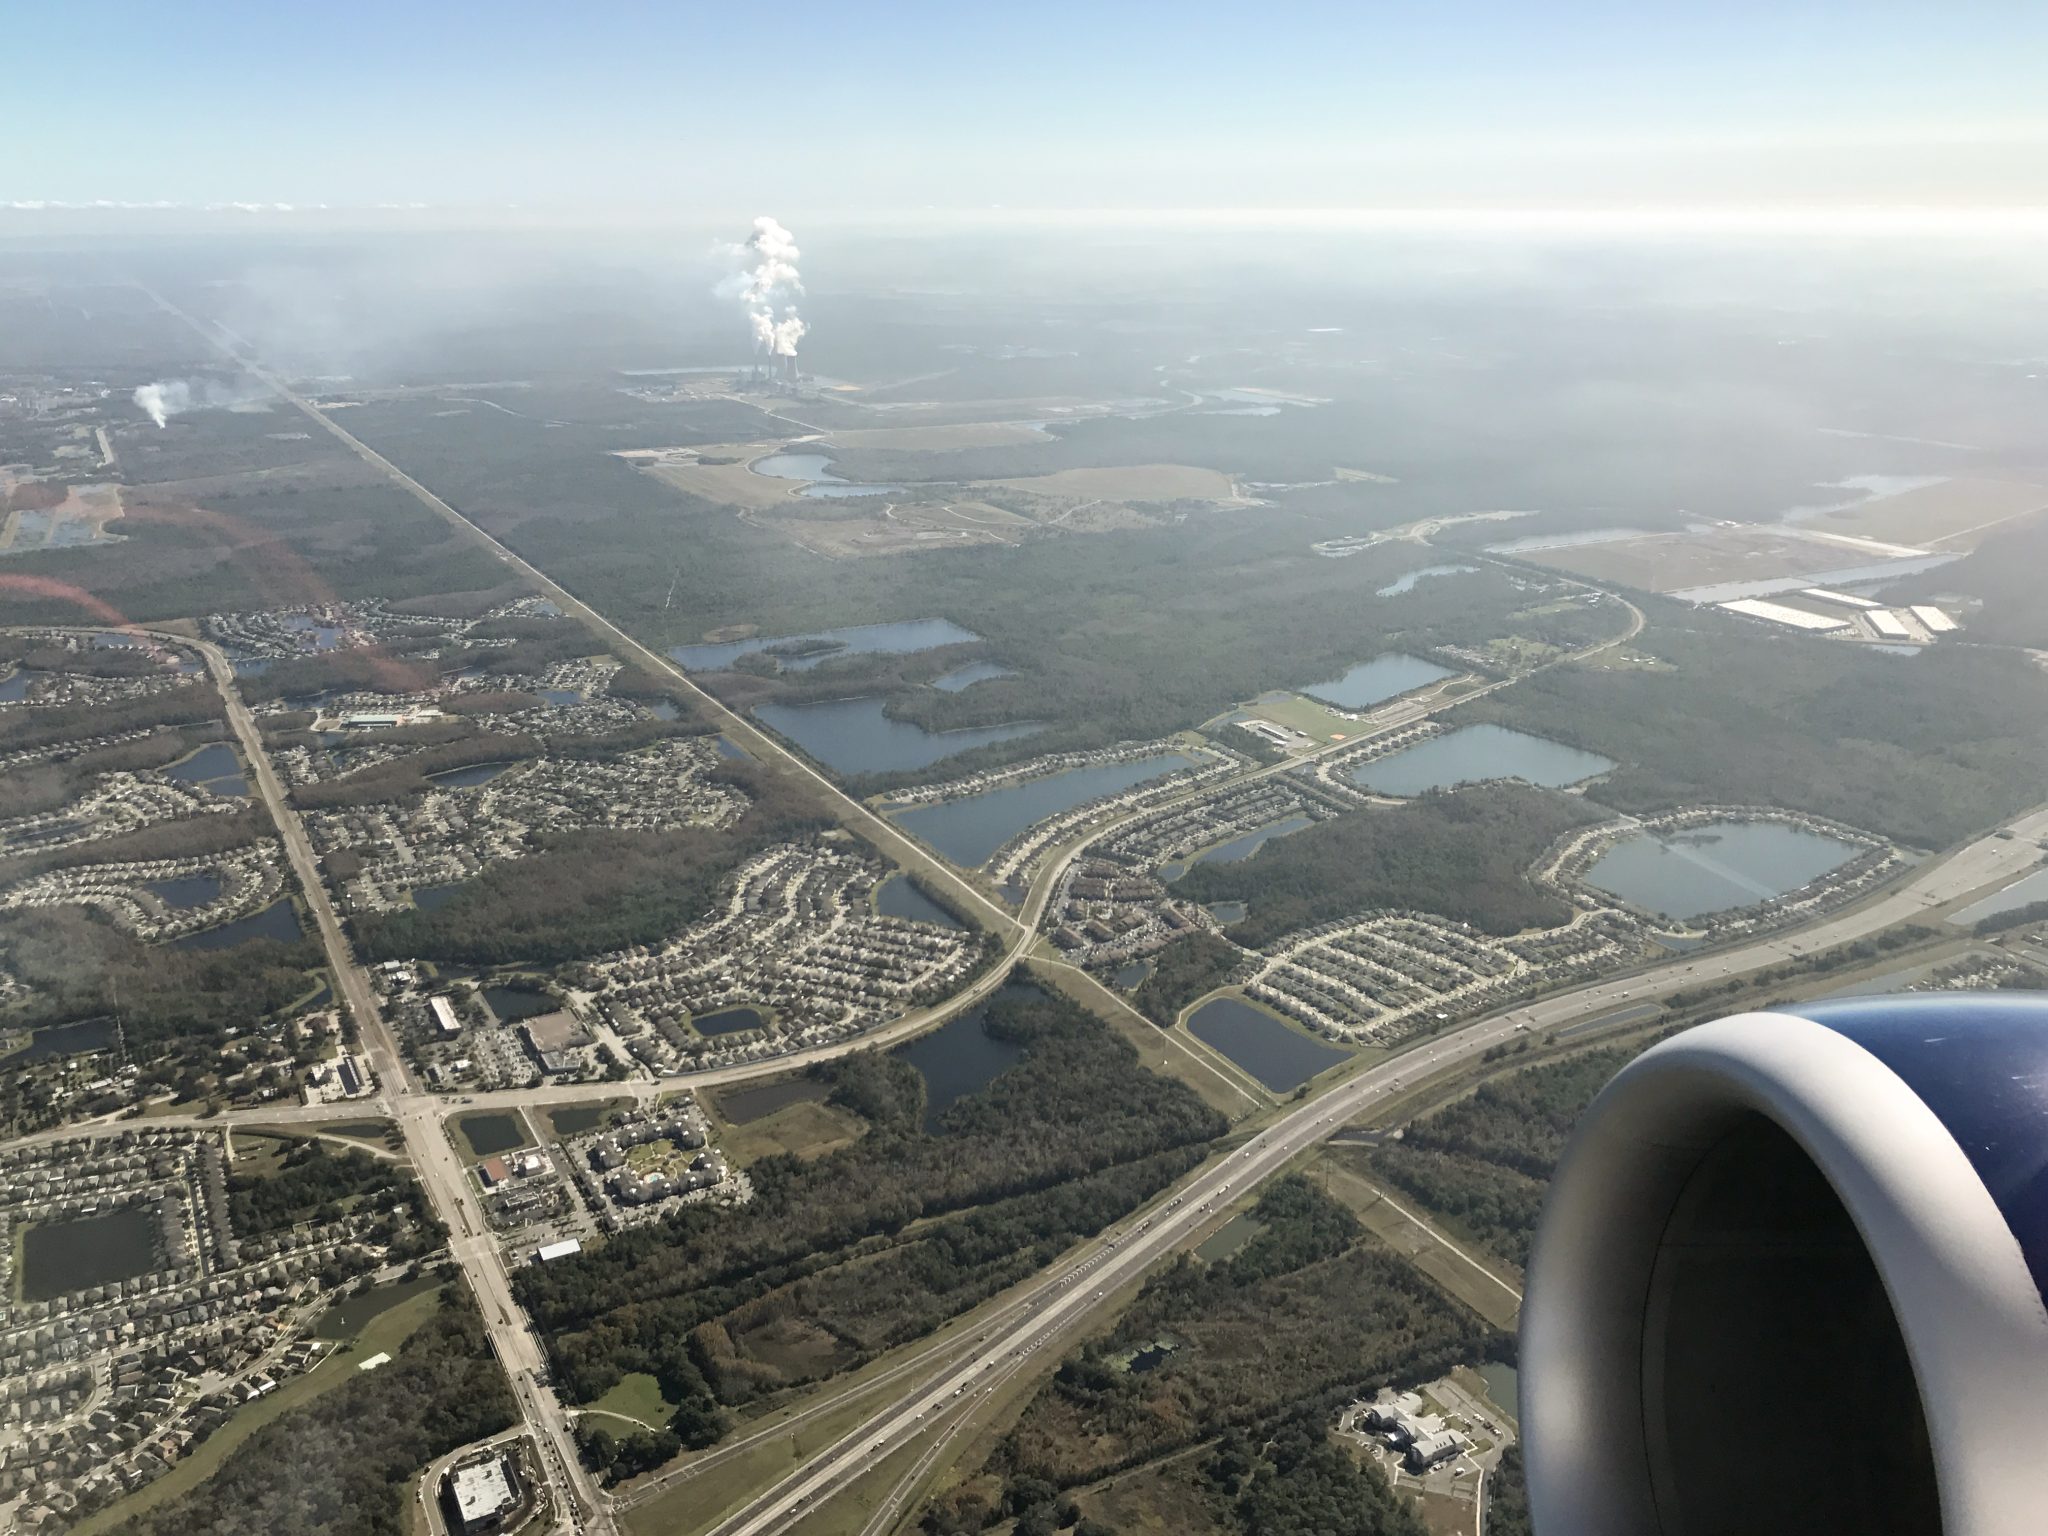 View of East Orlando from a plane